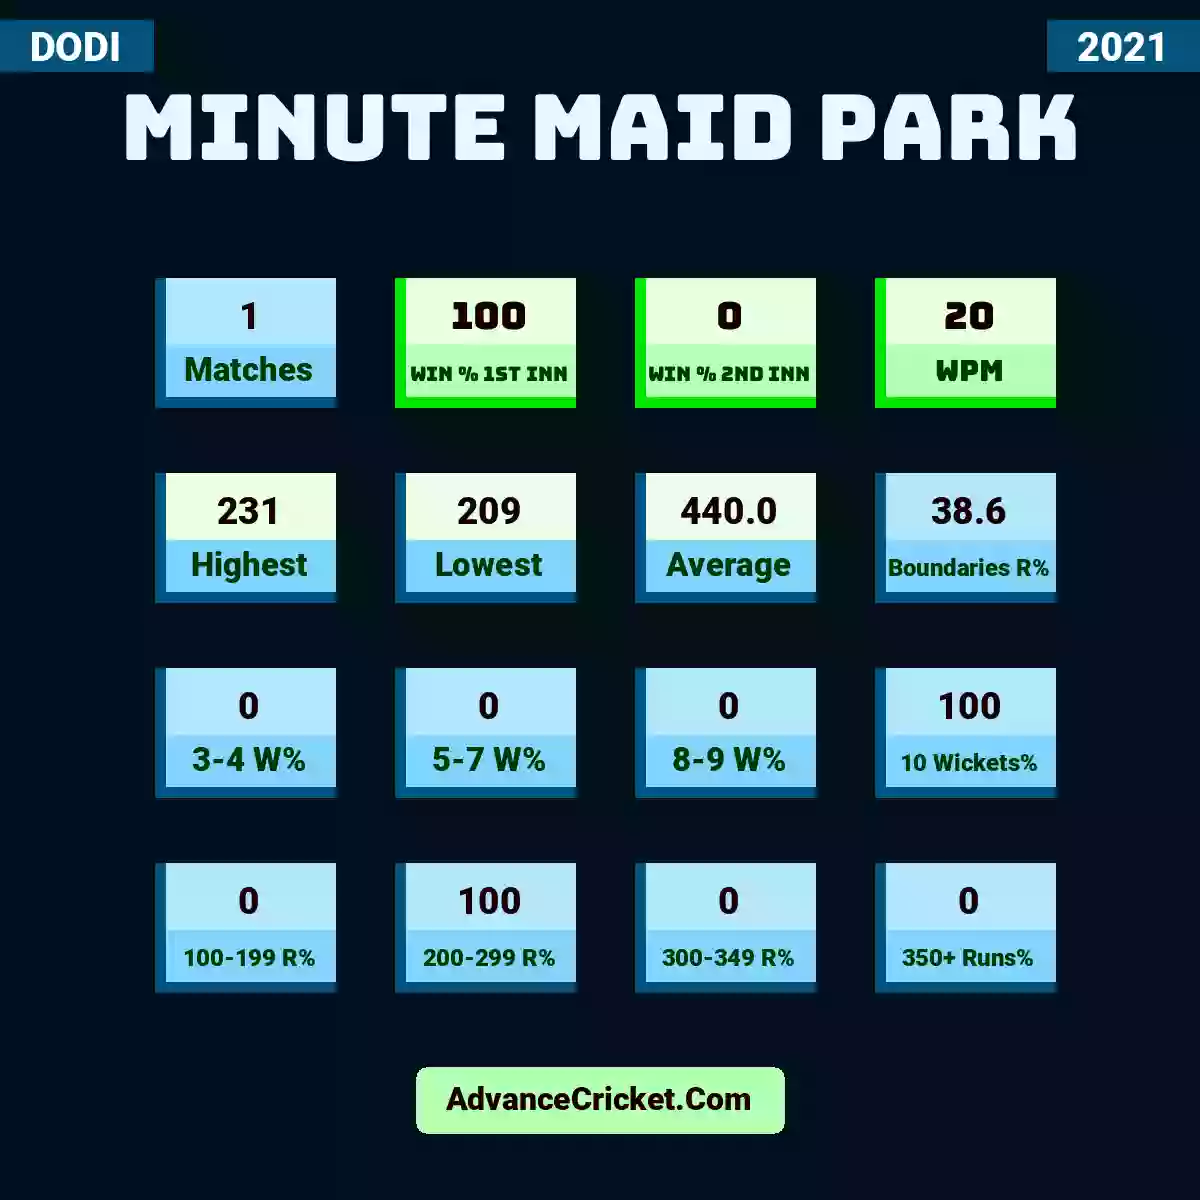 Image showing Minute Maid Park with Matches: 1, Win % 1st Inn: 100, Win % 2nd Inn: 0, WPM: 20, Highest: 231, Lowest: 209, Average: 440.0, Boundaries R%: 38.6, 3-4 W%: 0, 5-7 W%: 0, 8-9 W%: 0, 10 Wickets%: 100, 100-199 R%: 0, 200-299 R%: 100, 300-349 R%: 0, 350+ Runs%: 0.